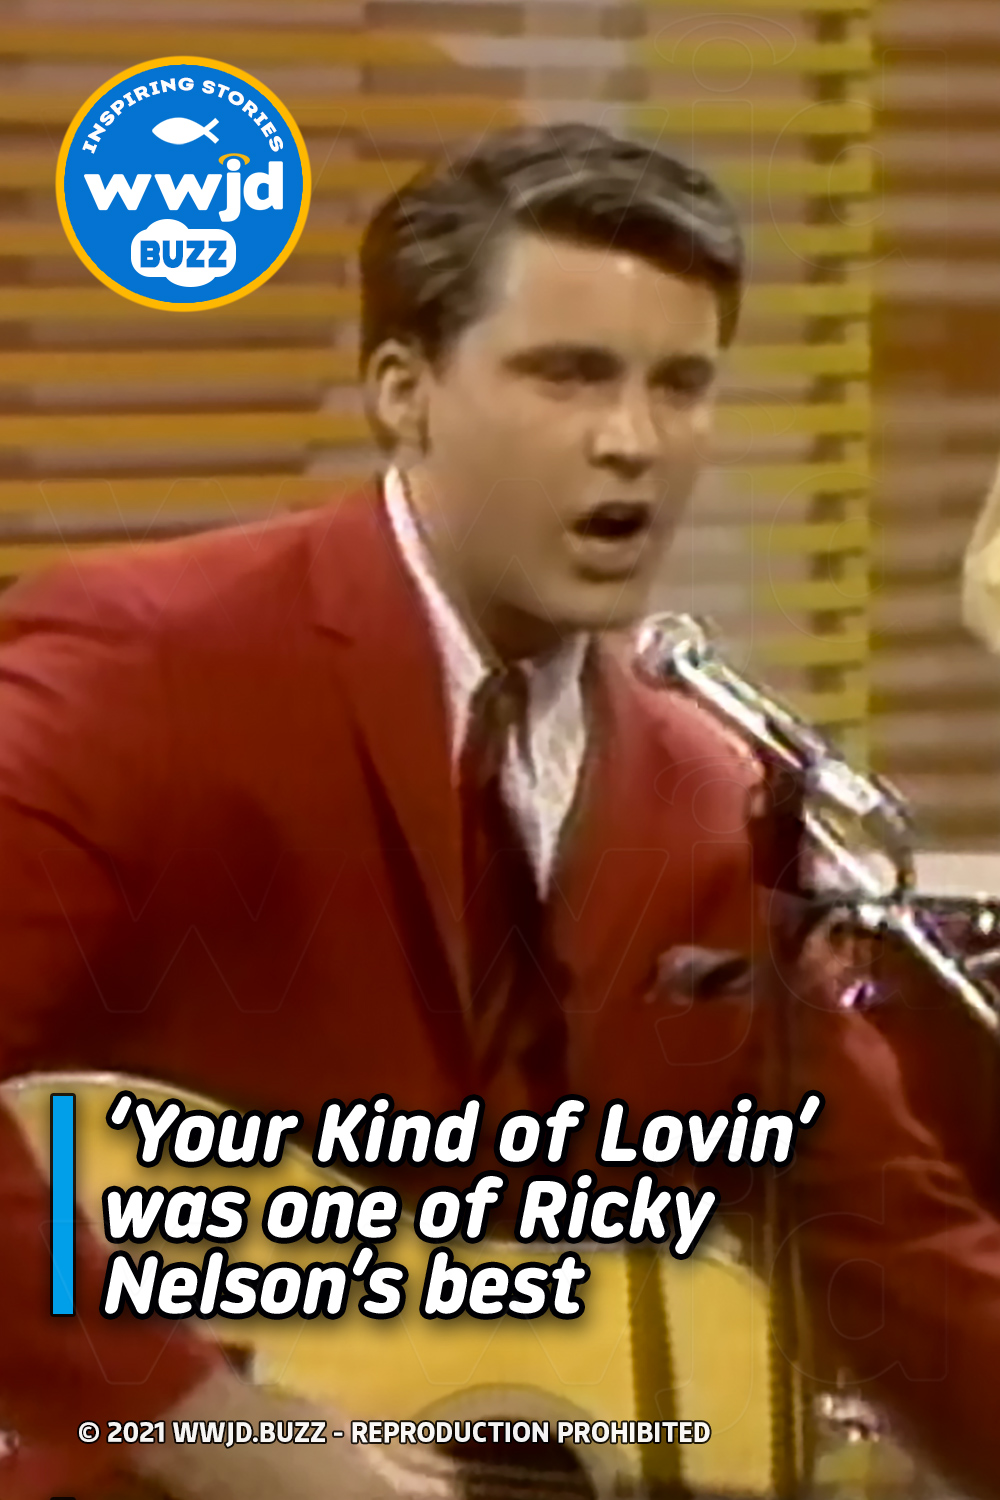 ‘Your Kind of Lovin’ was one of Ricky Nelson’s best